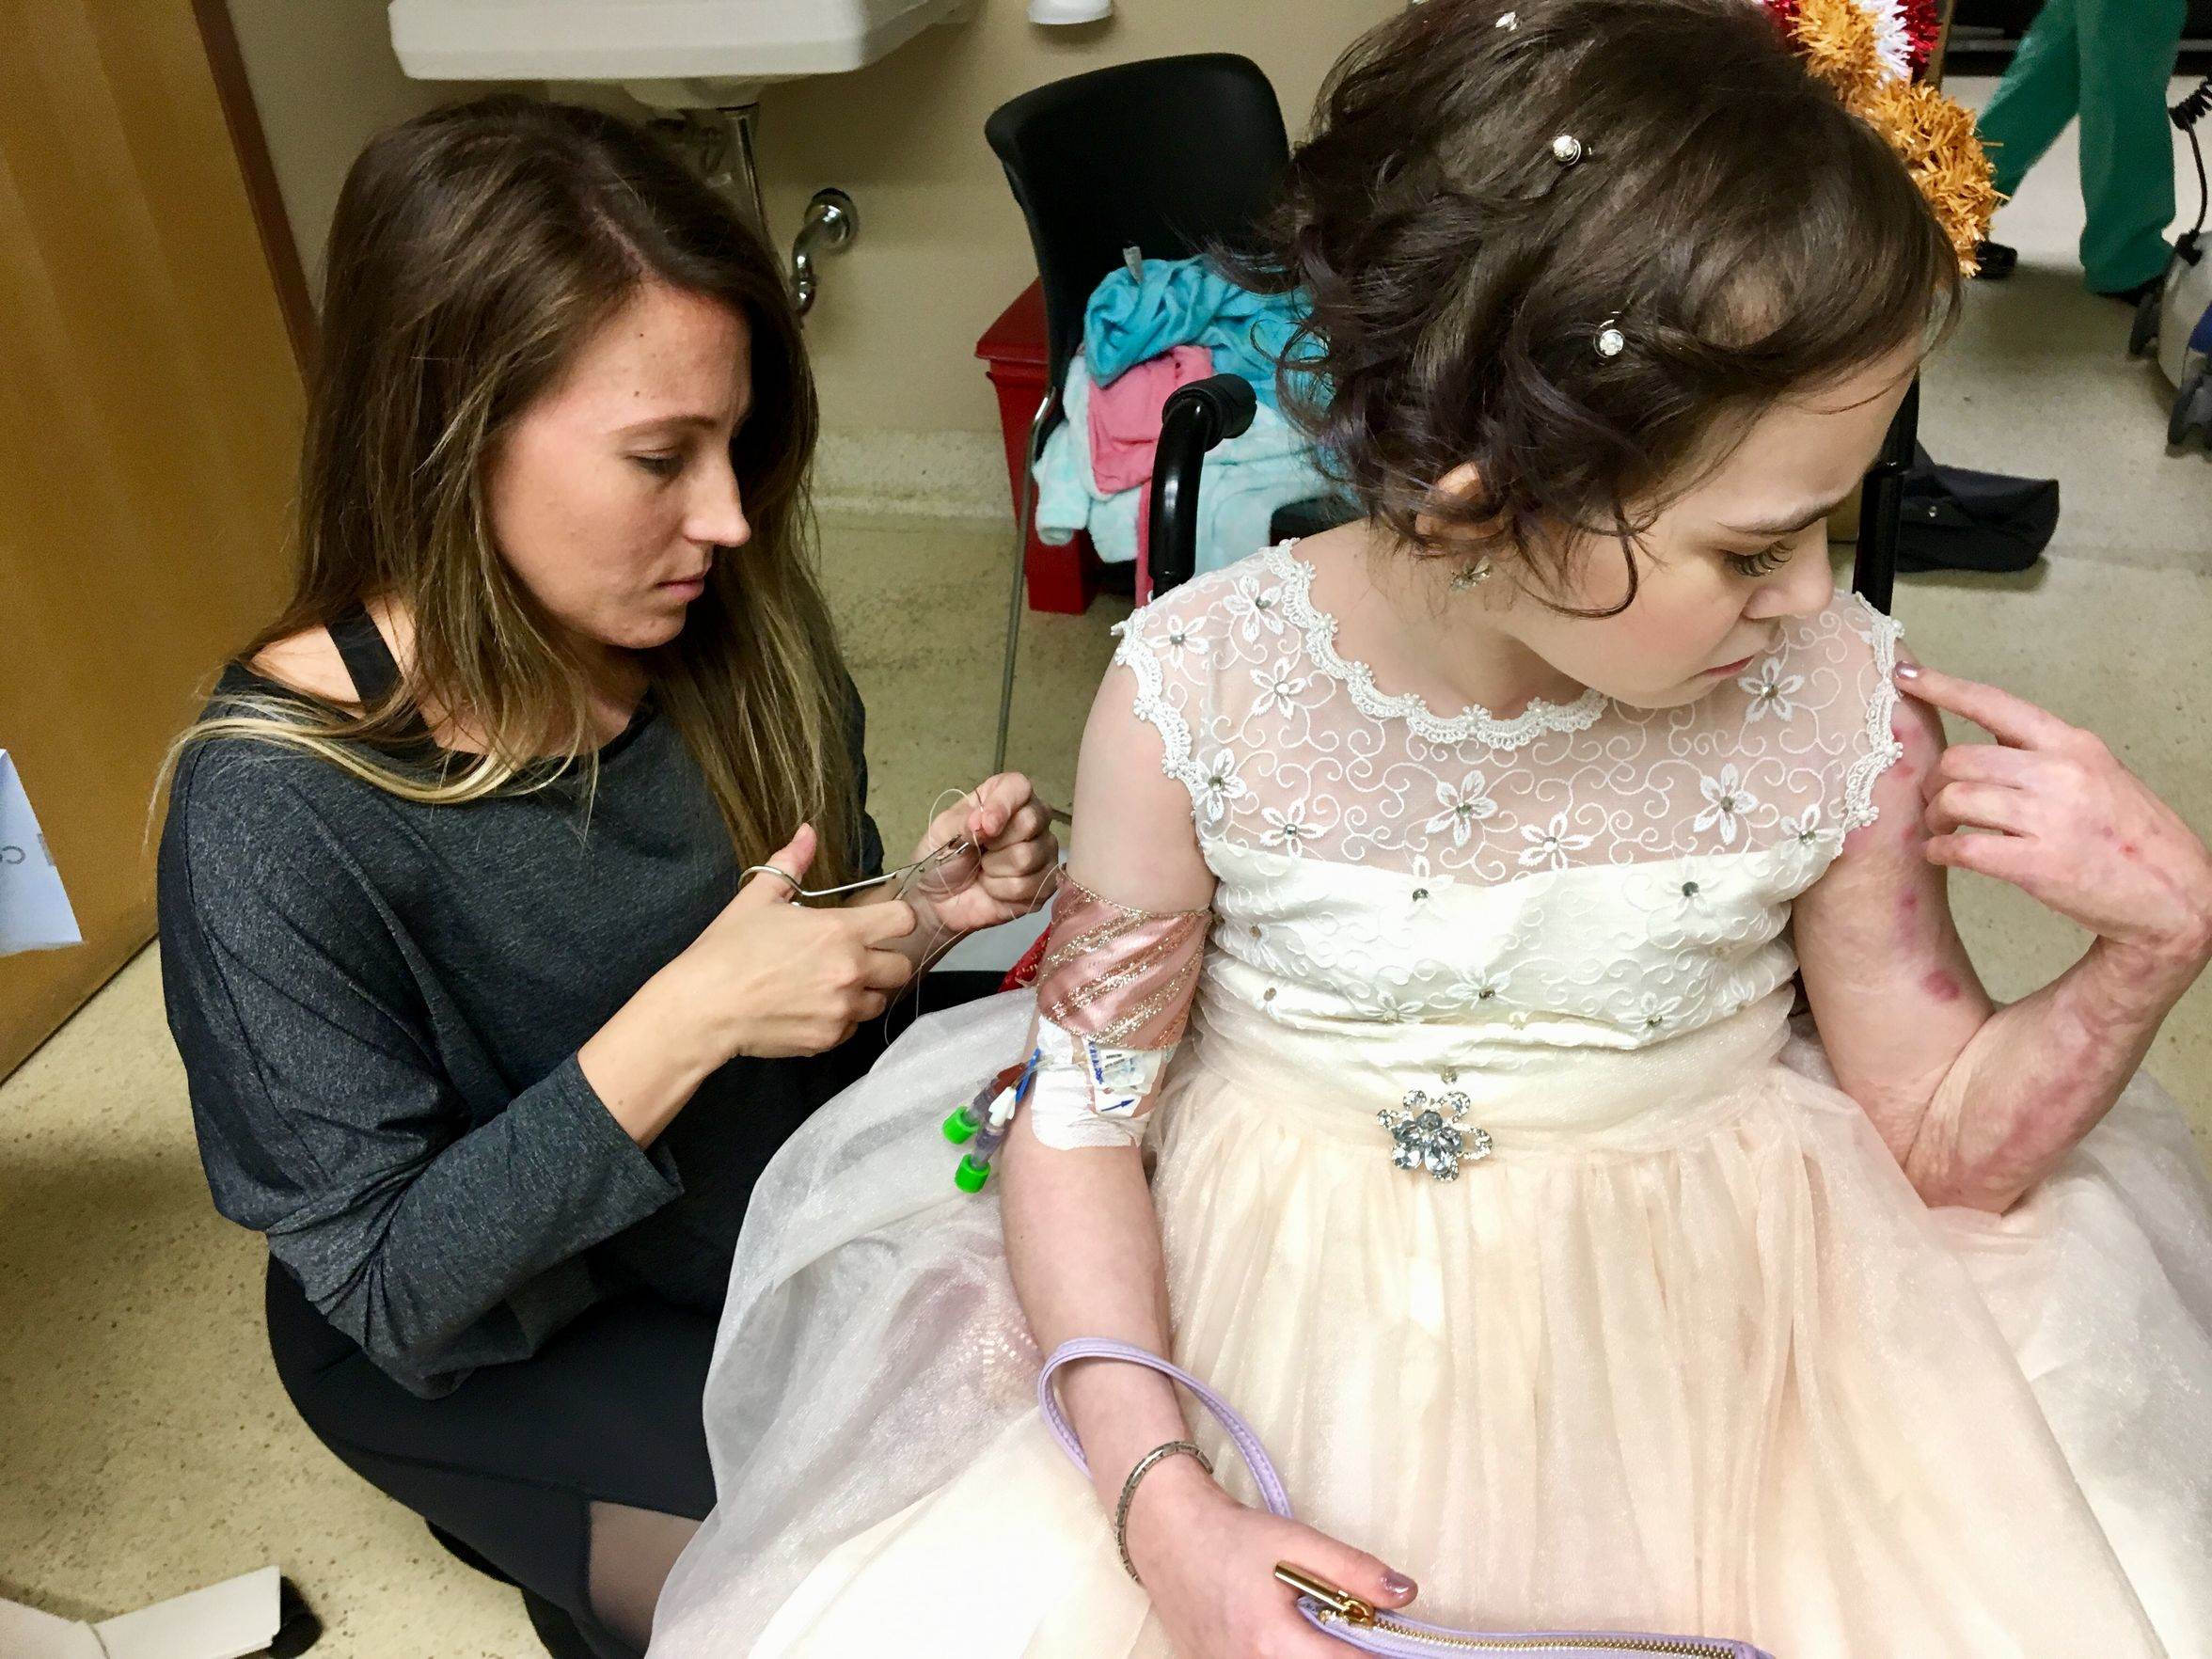 Physician resident Emily Helmick covers Isabella McCune’s the PICC line, a catheter tube in her right arm, with a ribbon, stitching it closed with a suture needle. “You know how to sew?” Isabella asked. “Skin,” Helmick said, making Isabella giggle.